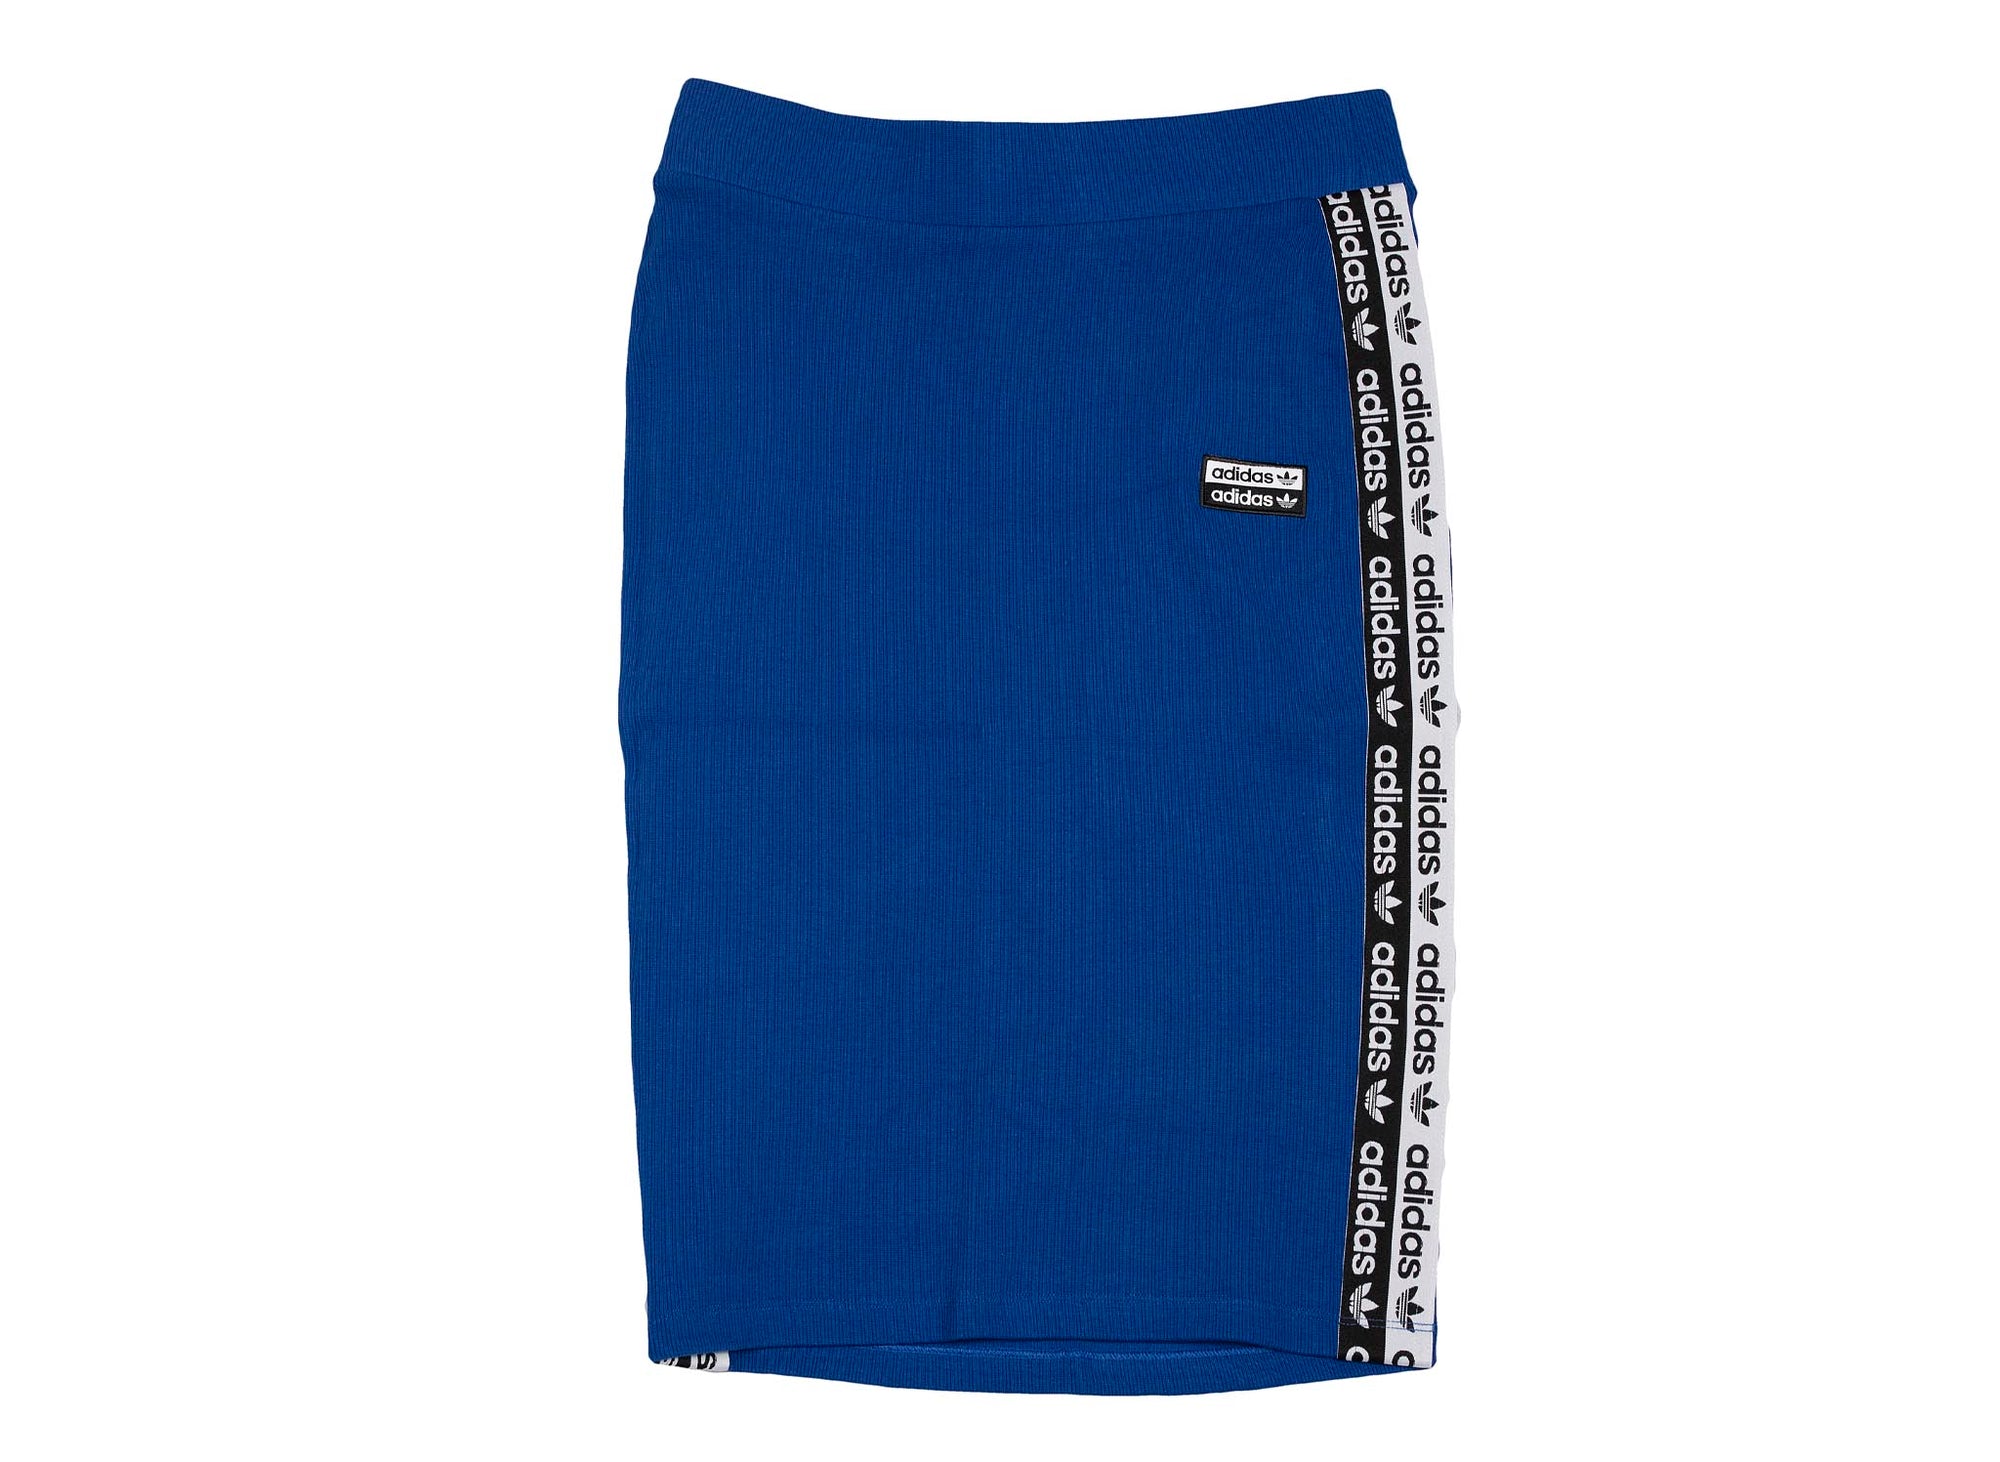 ADIDAS SKIRT - Oneness Boutique